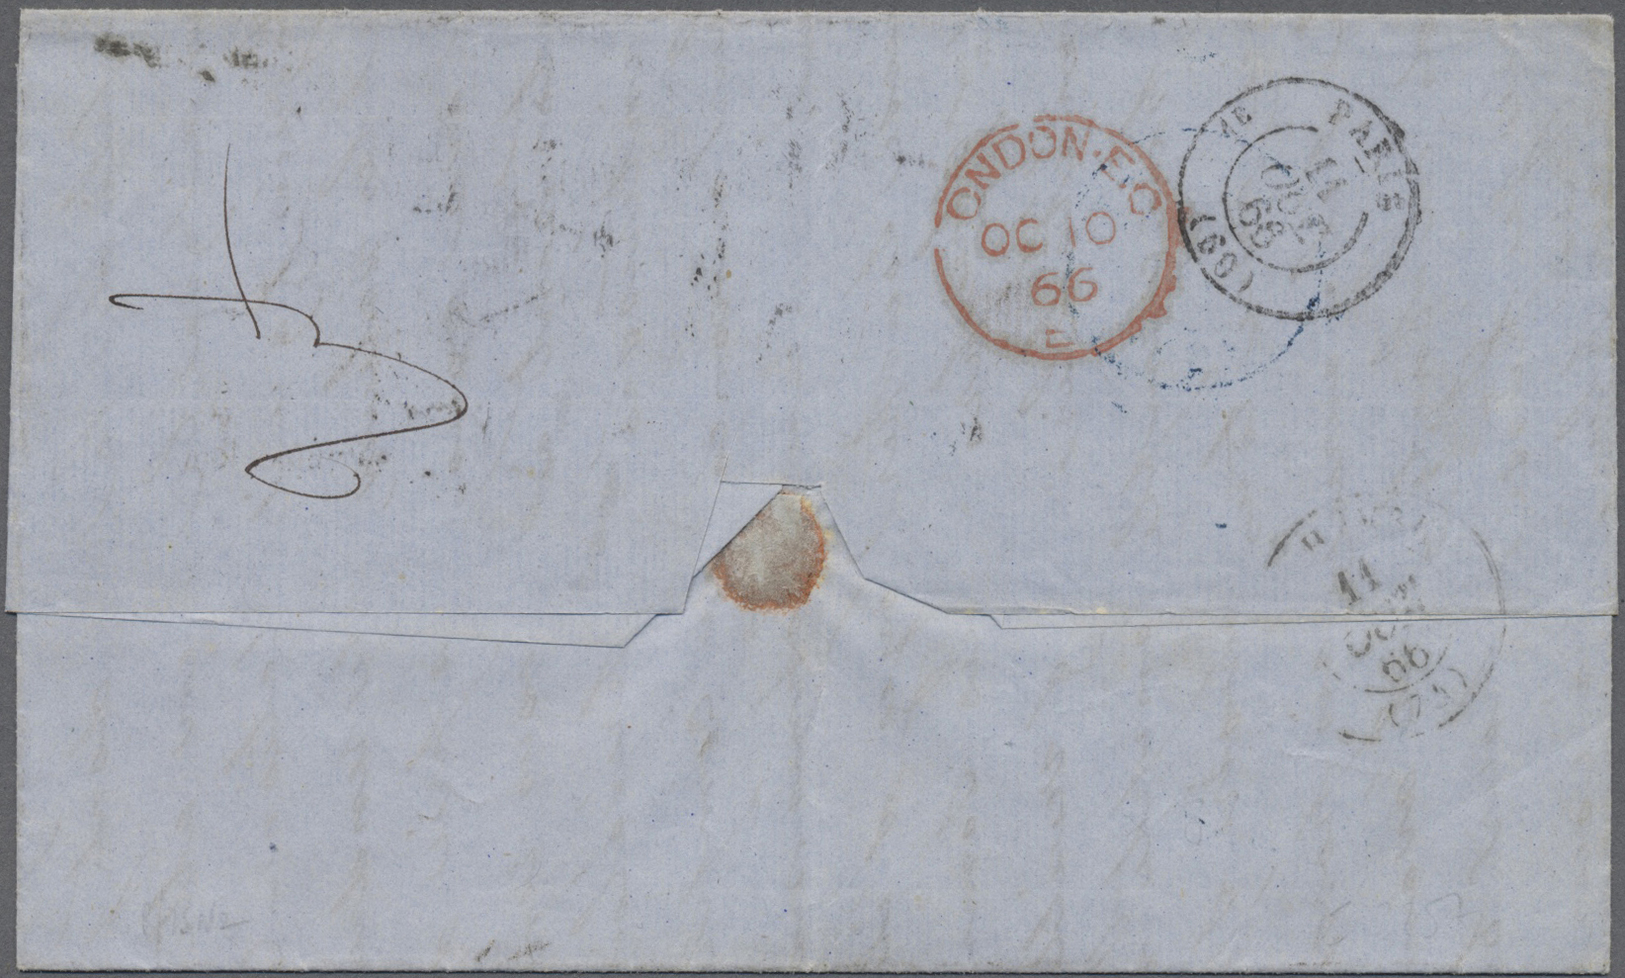 Br Portugal - Madeira - Funchal: 1866, FUNCHAL 2/10 Blue Double Circle On Entire Letter "Via Anglaise" To Le Havr - Funchal